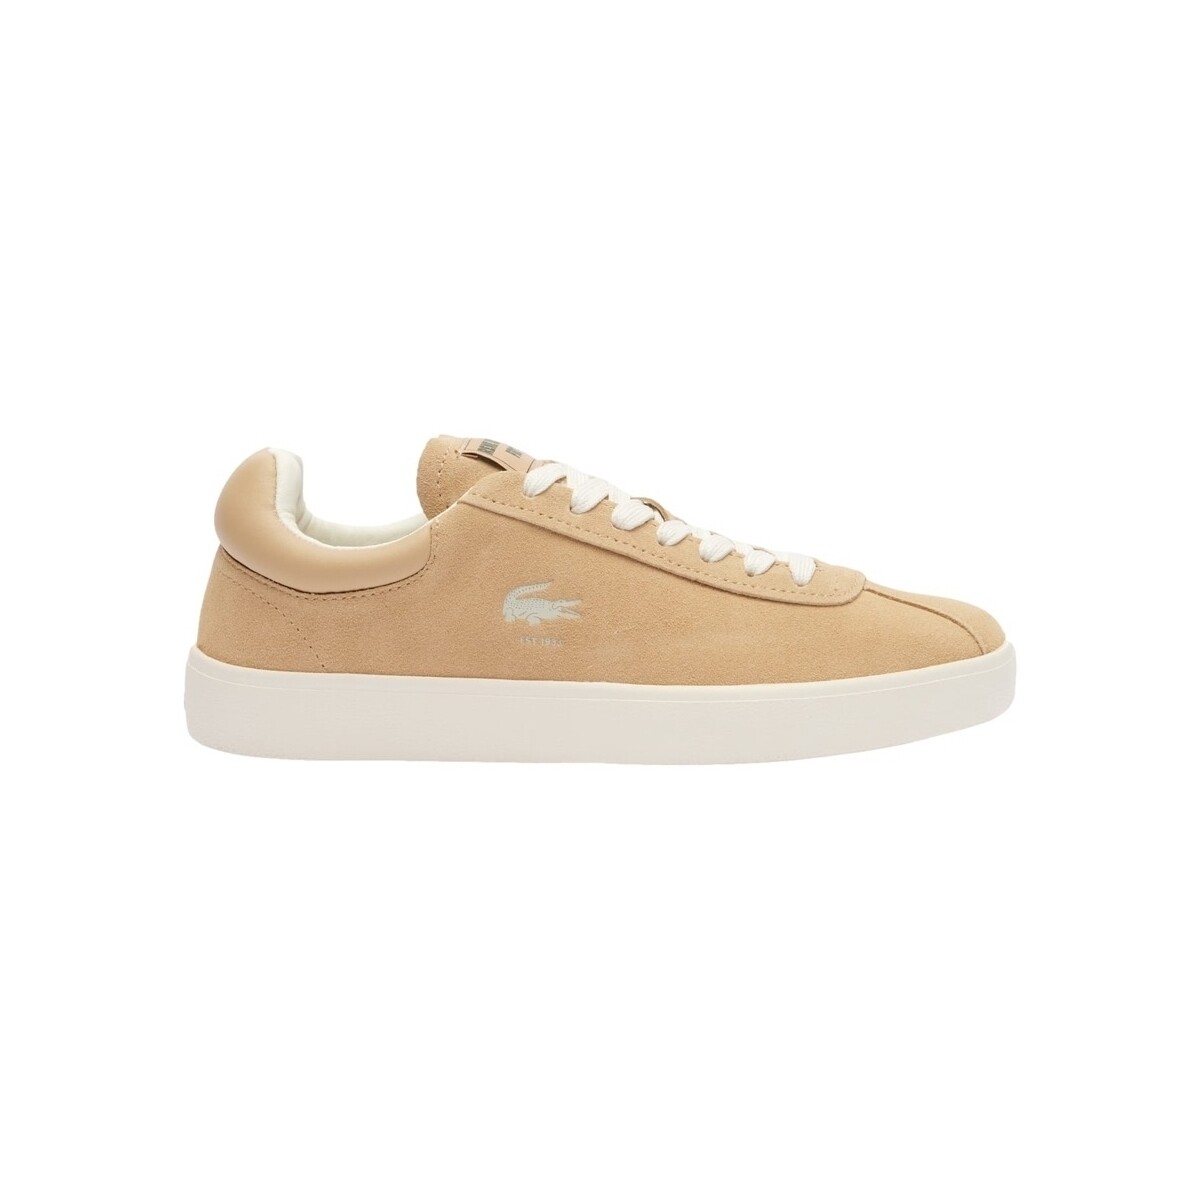 Sneakers Lacoste Baseshot 124 2 SFA – Lt Brown/Off White